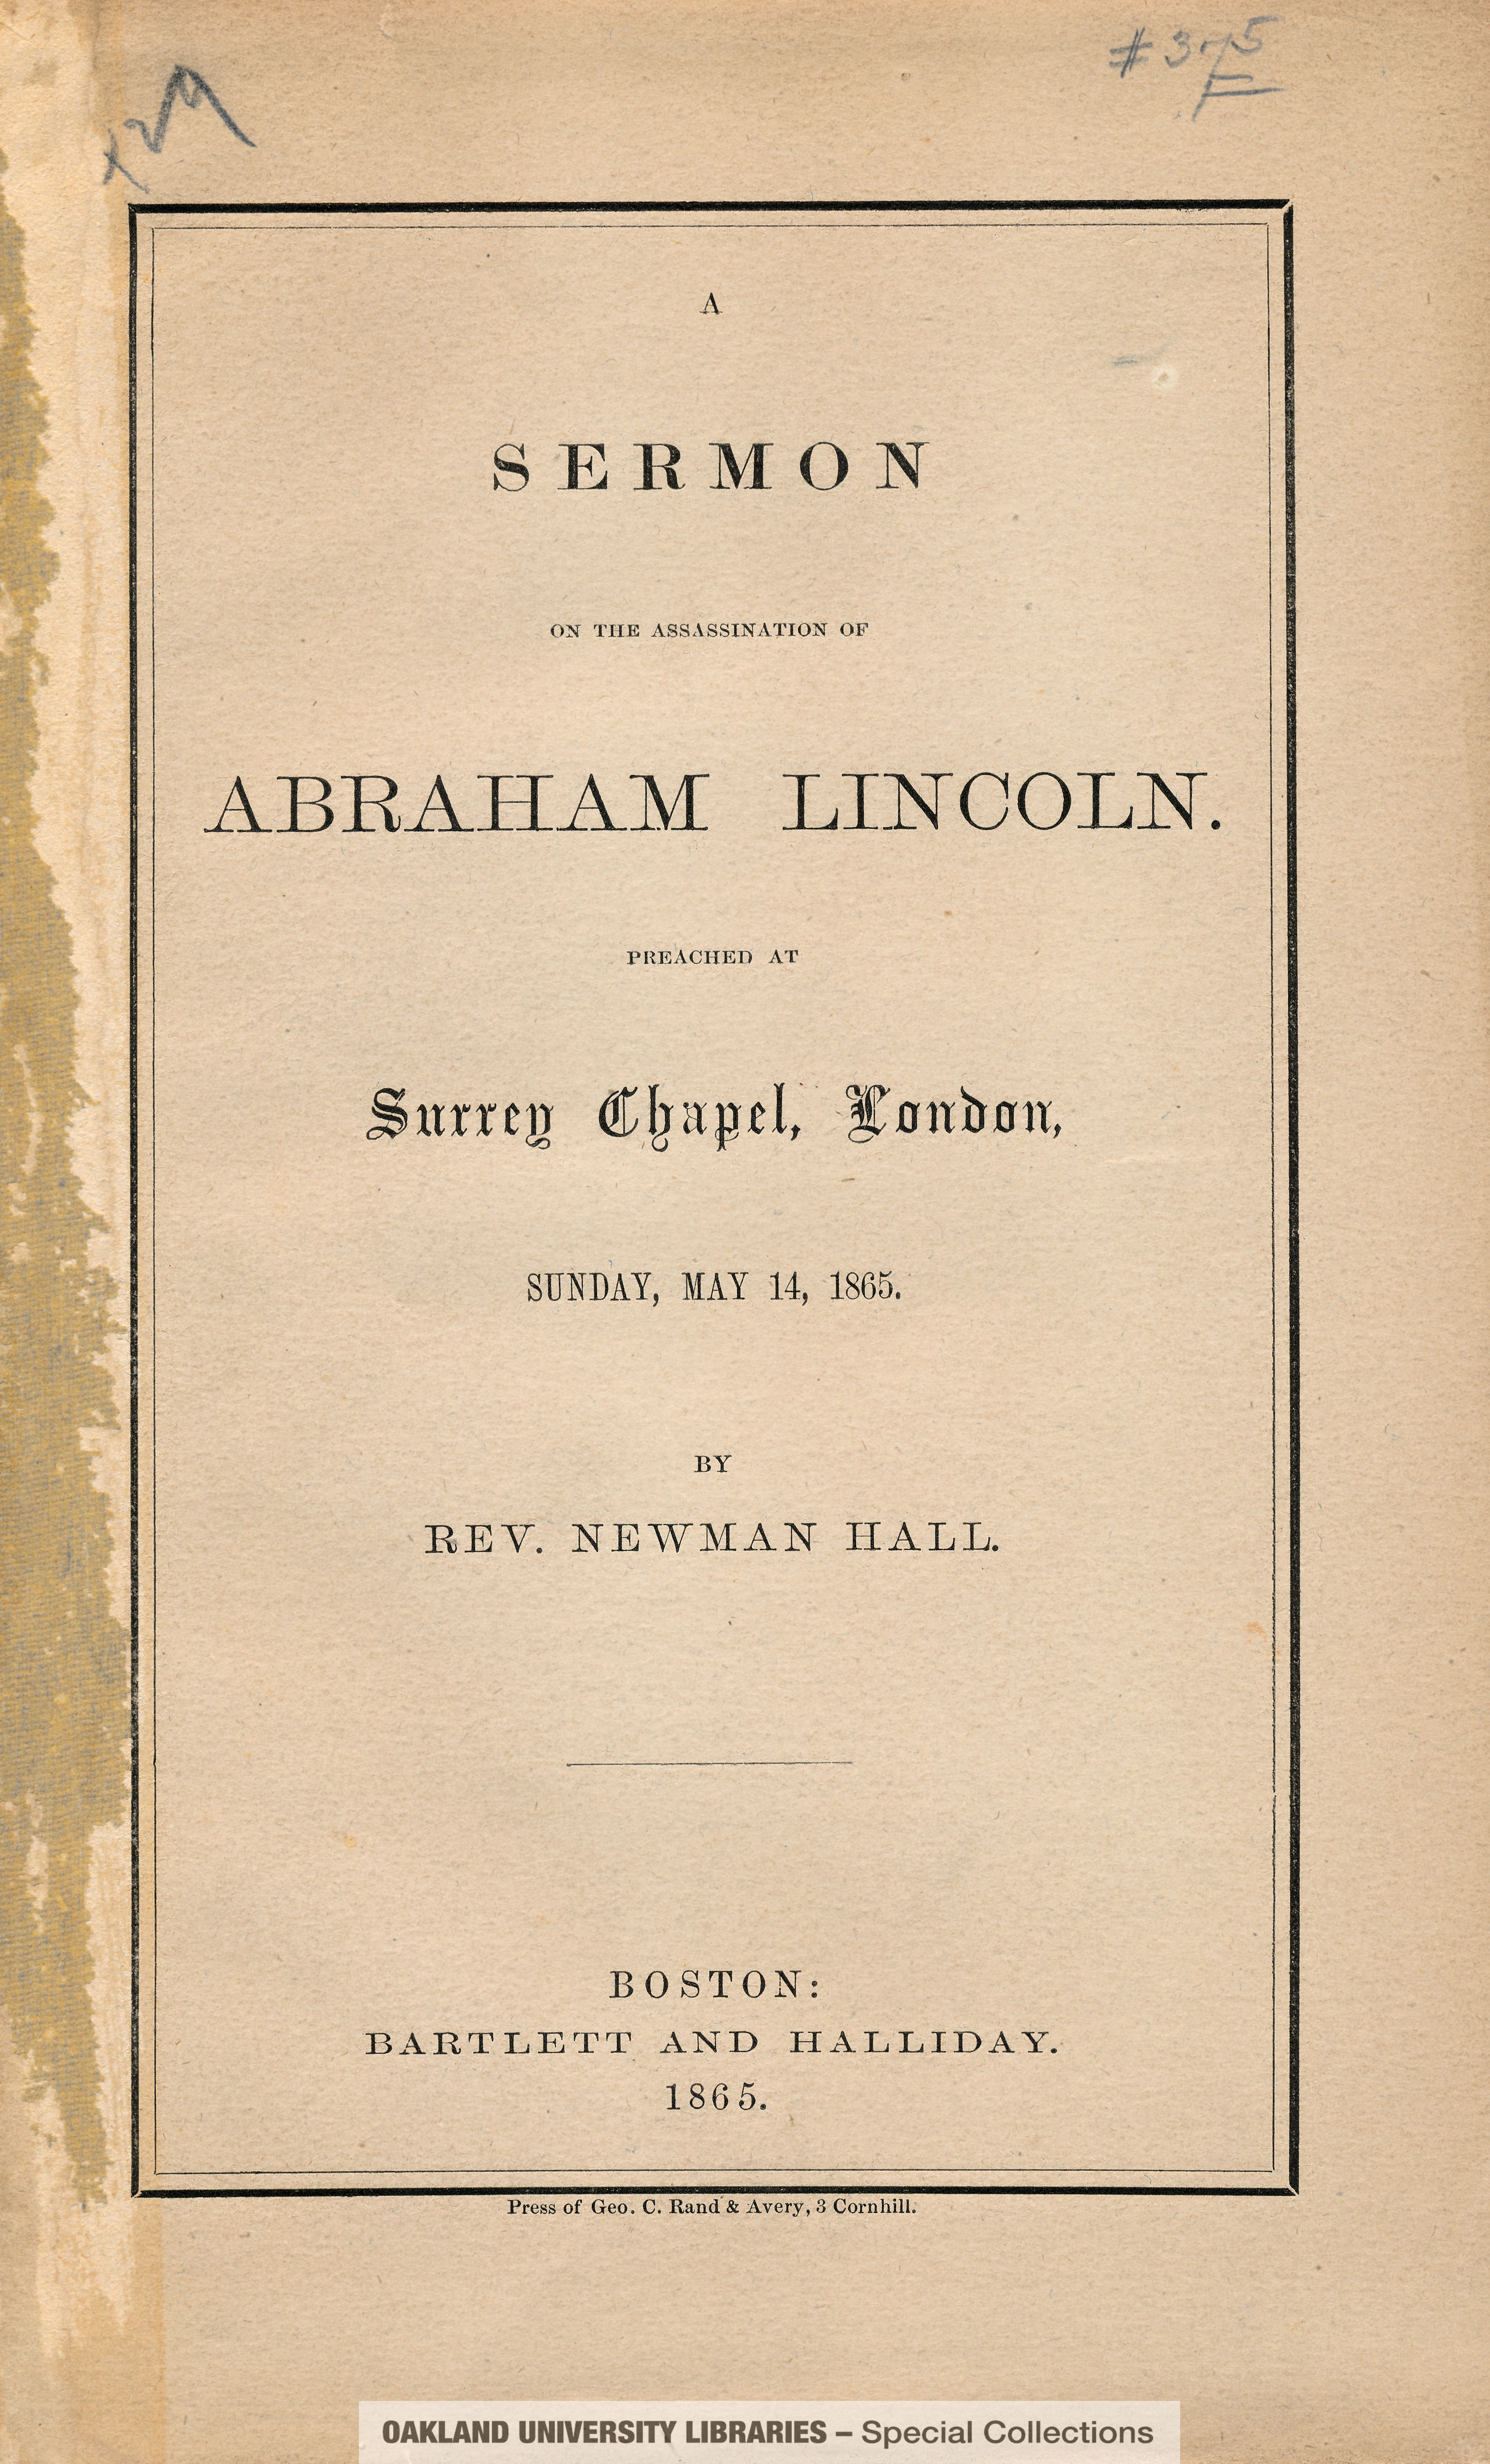 Sermon on the Assassination of Abraham Lincoln